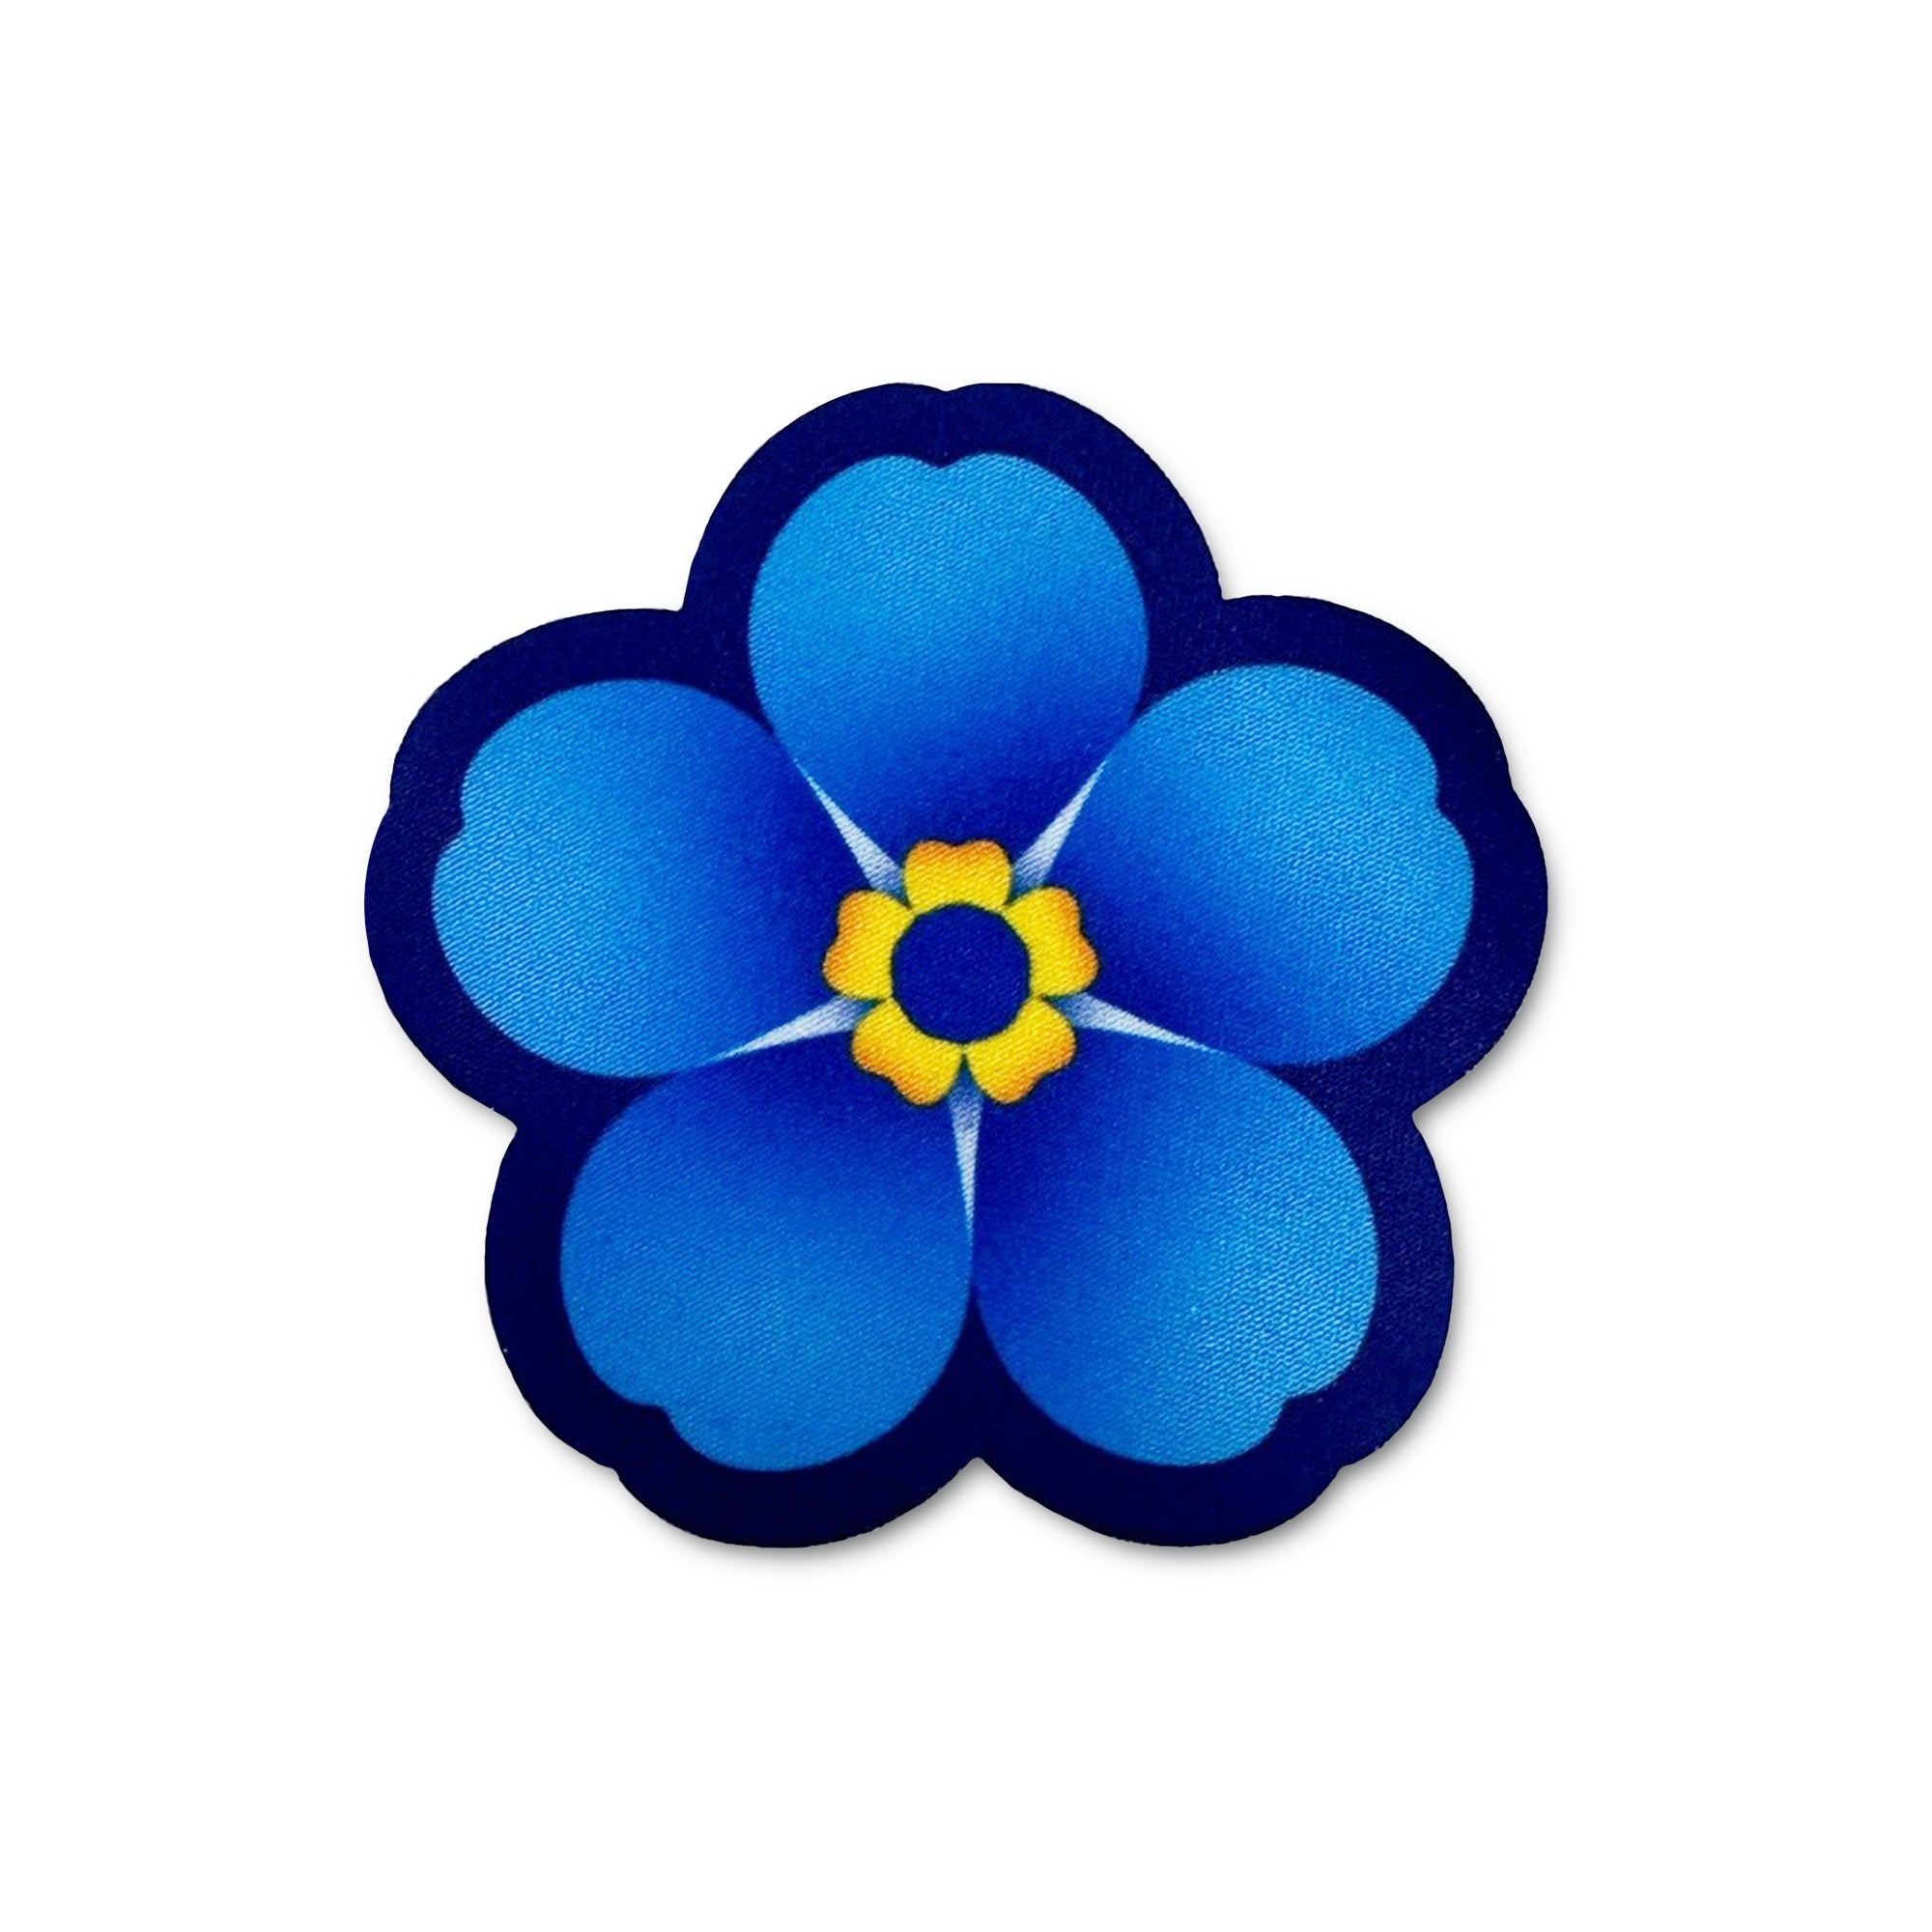 Iron-on forget-me-not patch